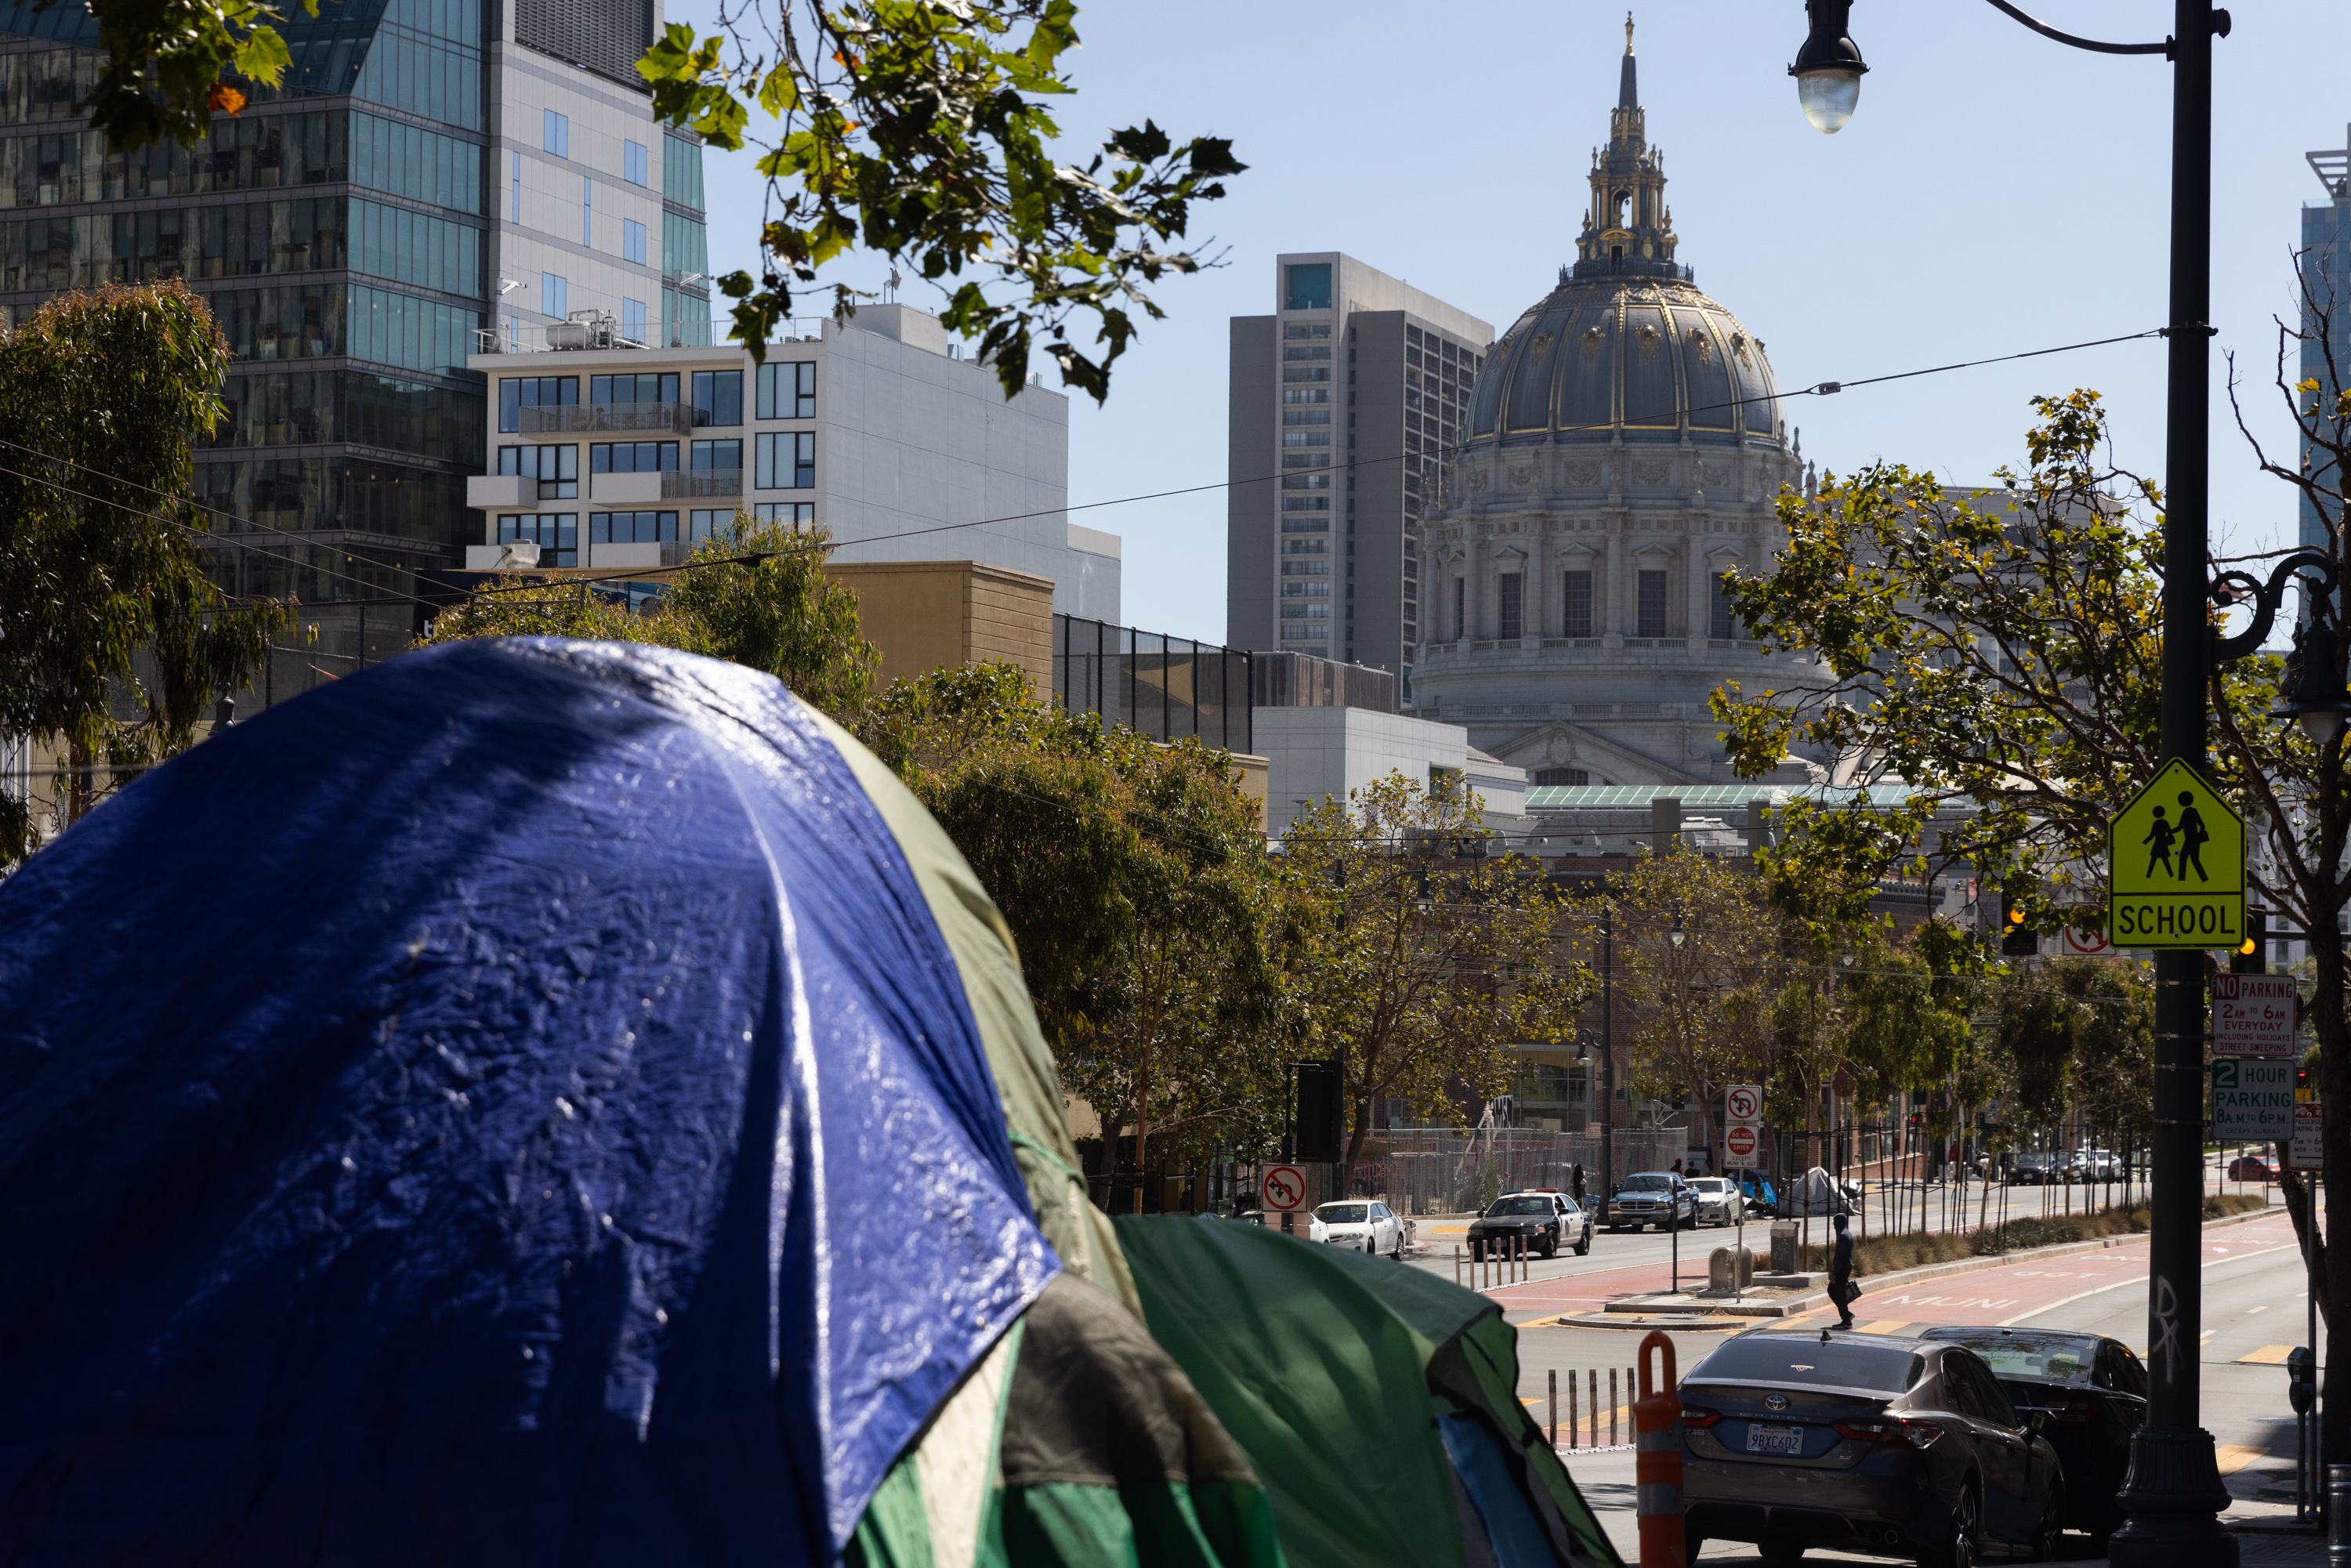 A tent with city hall in the background.